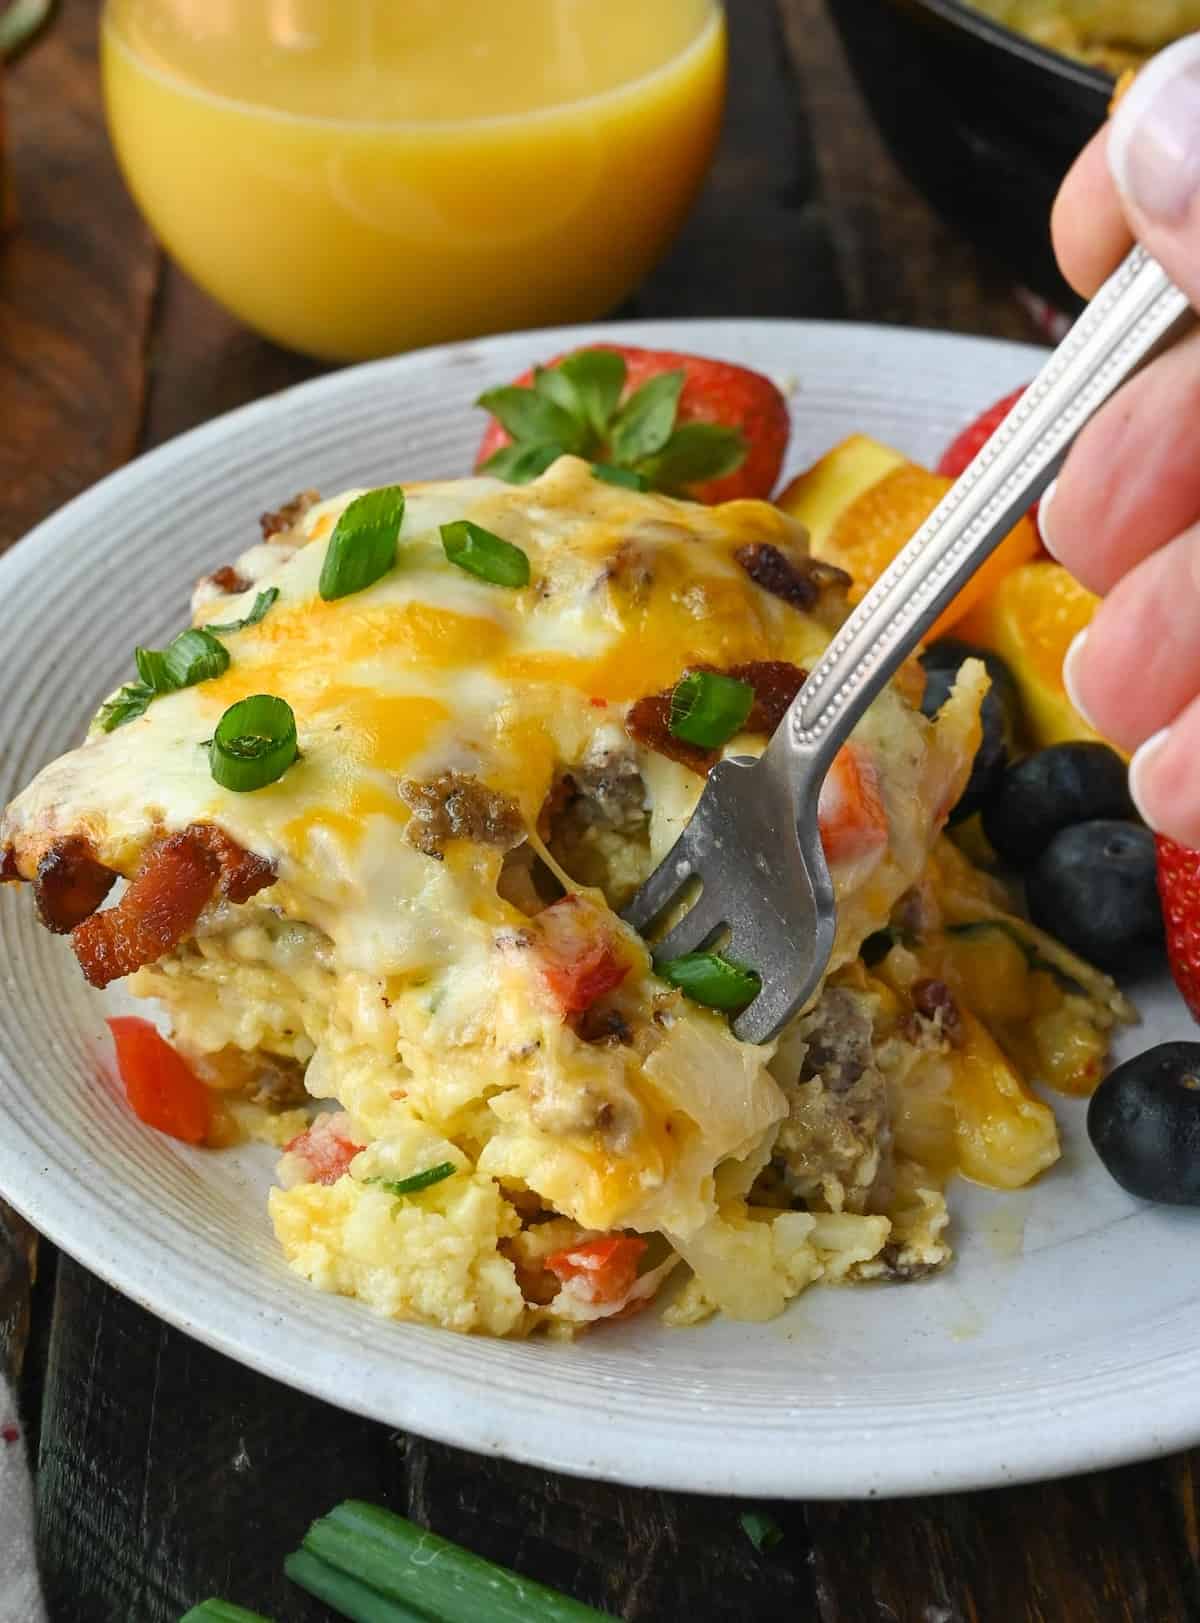 A fork picking up a bite of breakfast casserole on a plate.